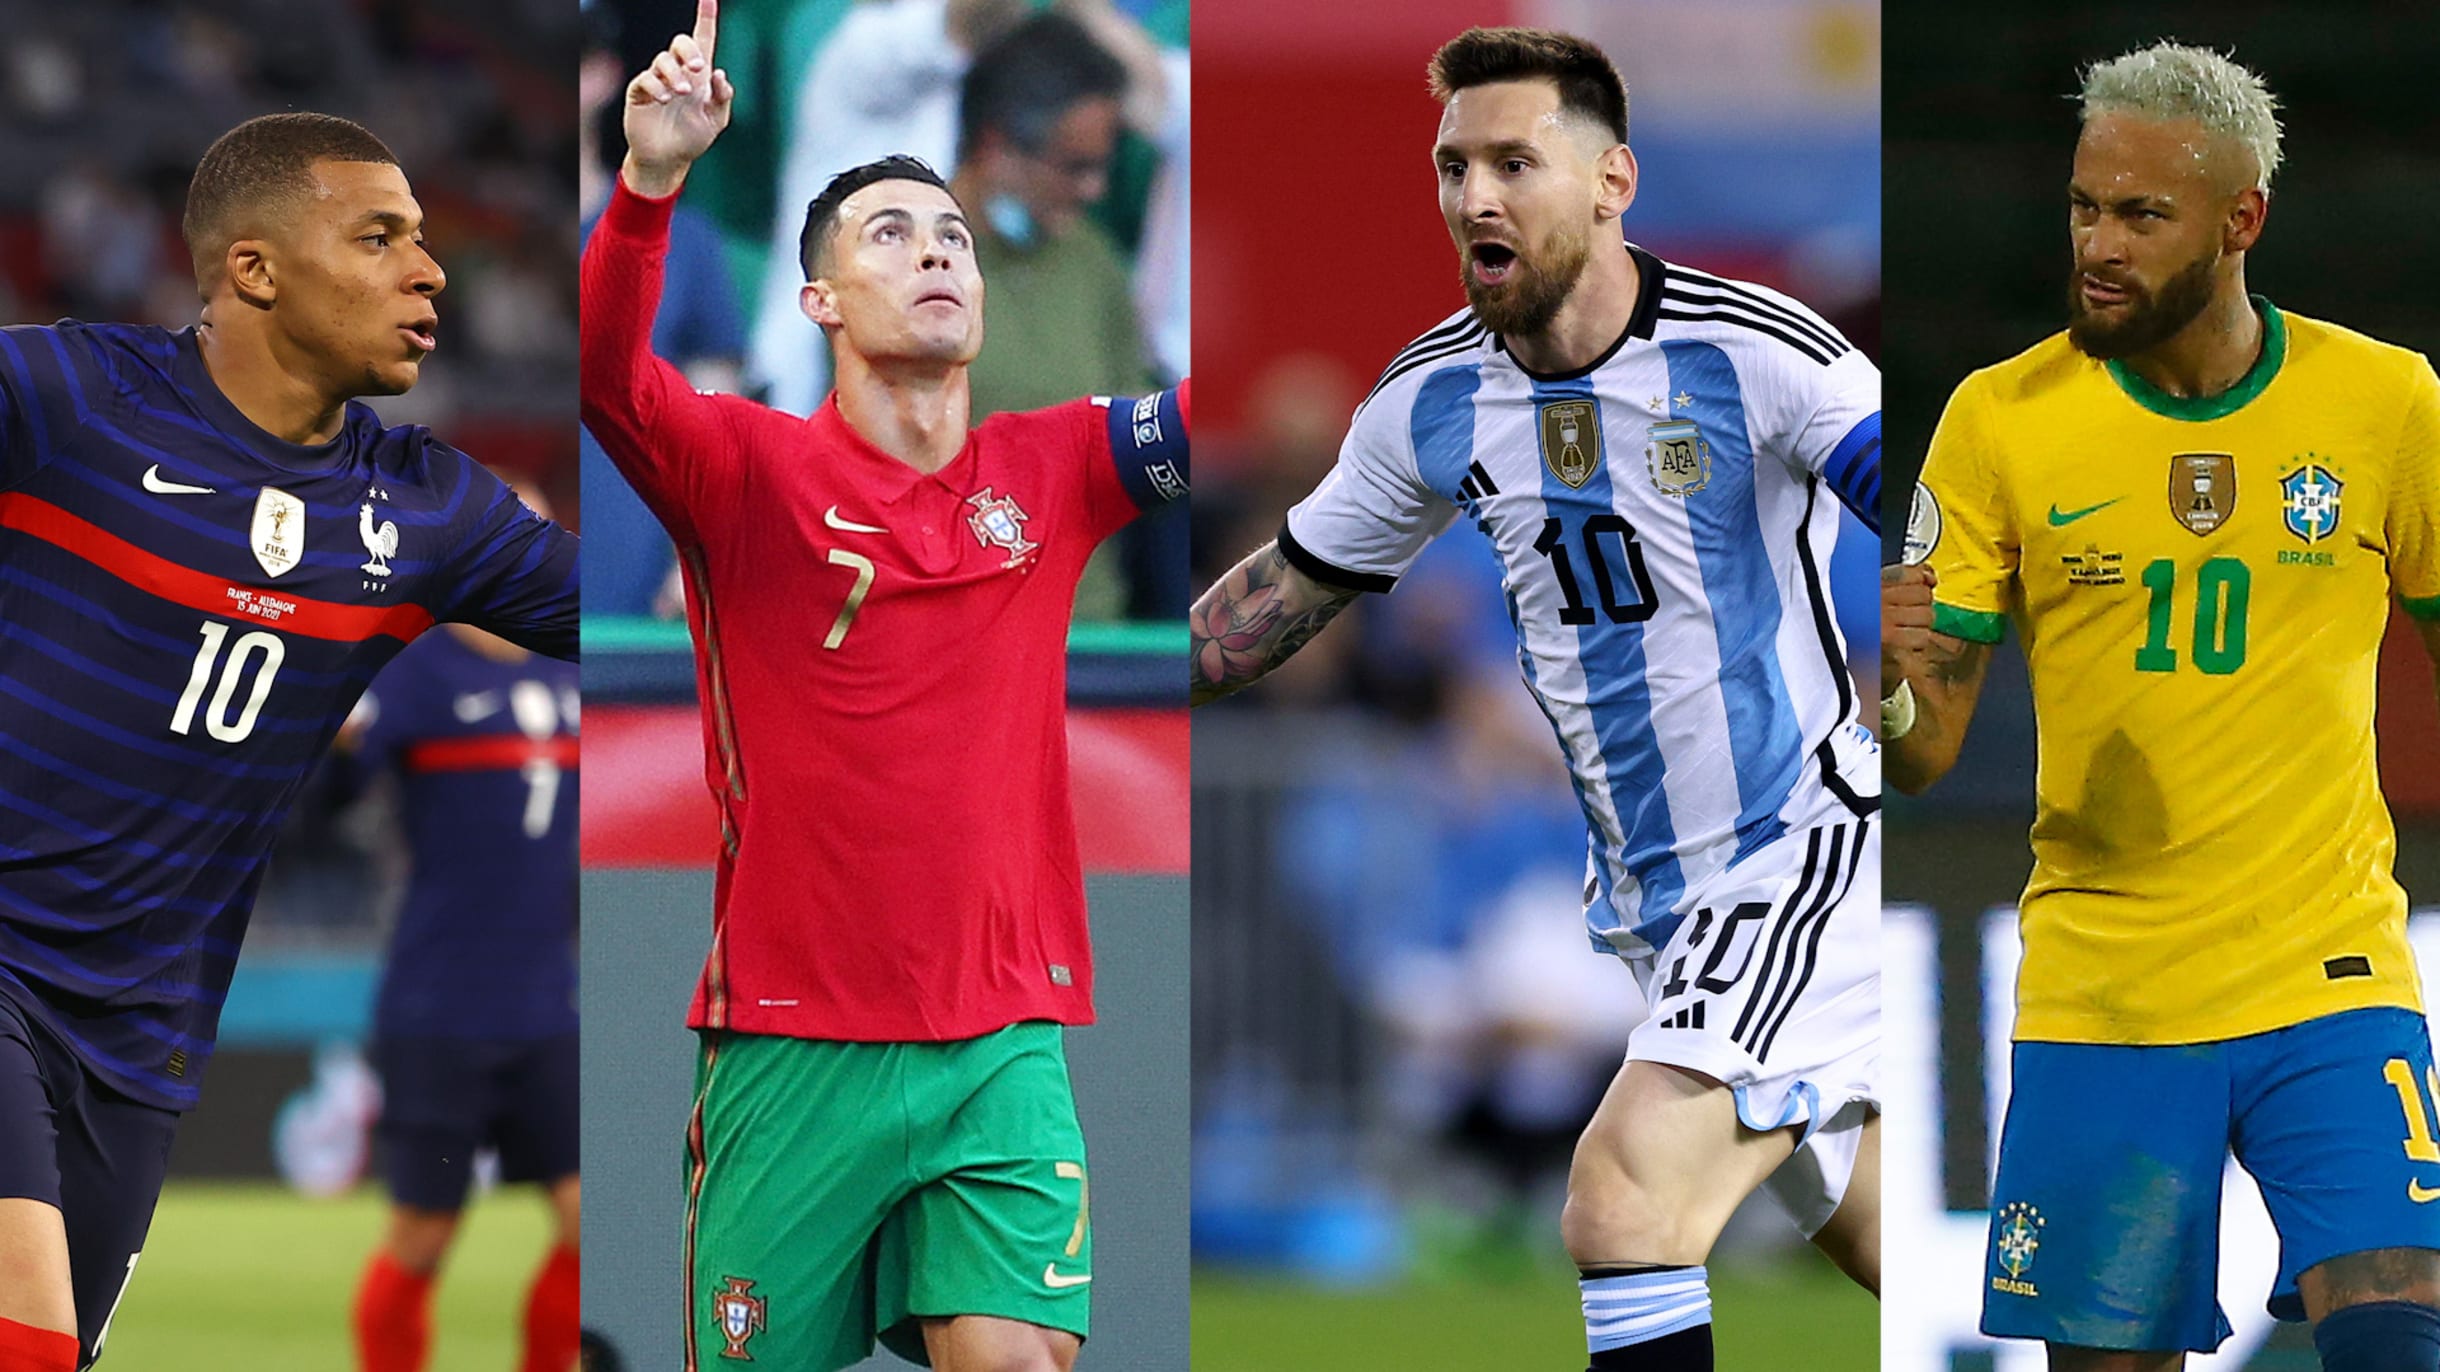 Prevail volleyball spyd Cristiano Ronaldo, Lionel Messi, Neymar or Kylian Mbappe? Top 10 social  media stars at the FIFA World Cup Qatar 2022